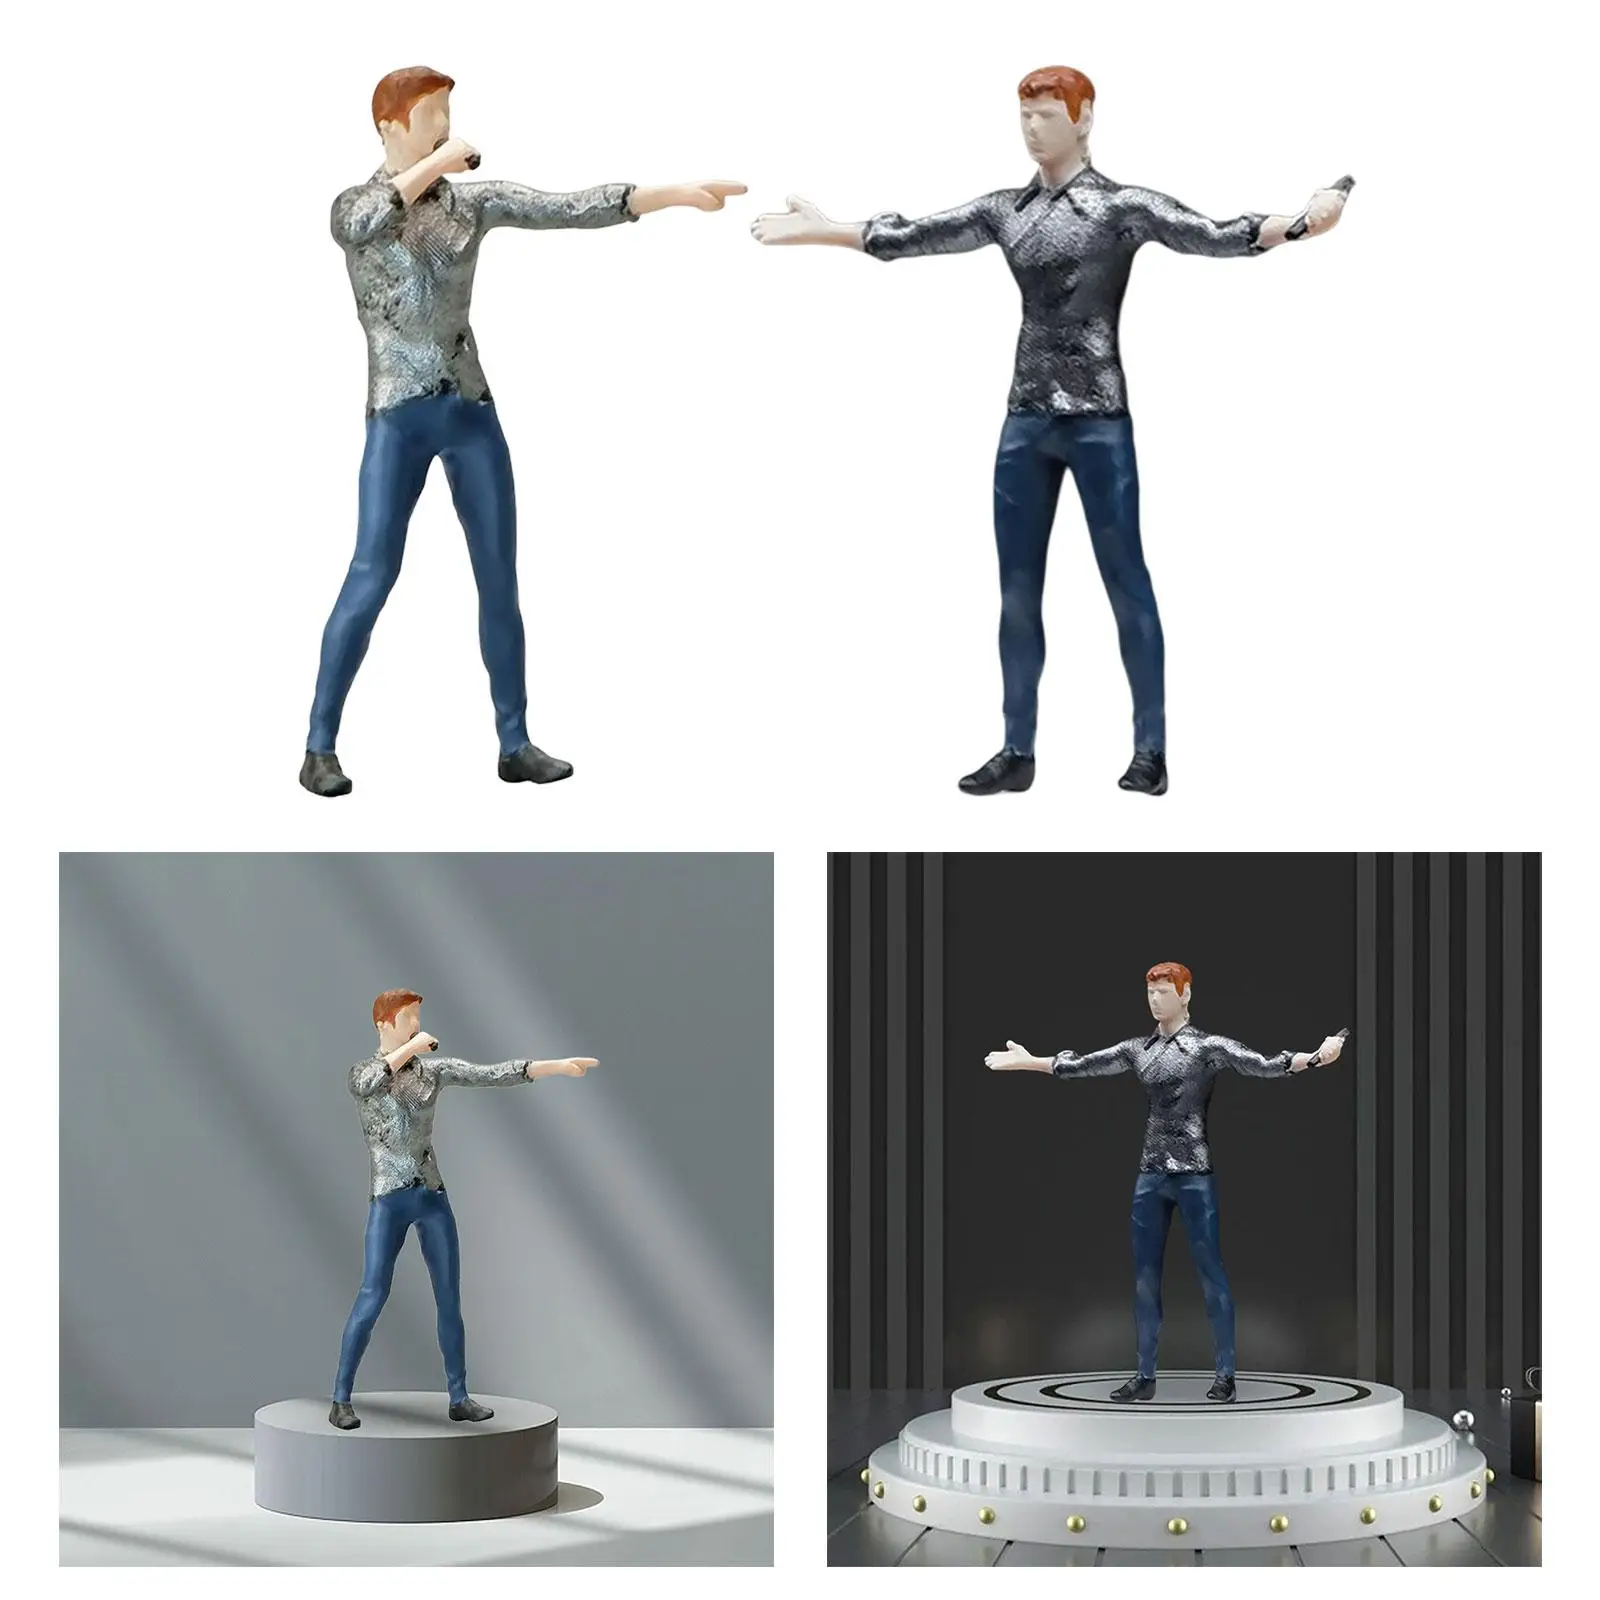 1: 64 Scale Miniature Singer Model Street Male Singer Display People Figurines for DIY Scene Diorama Photography Props Decor